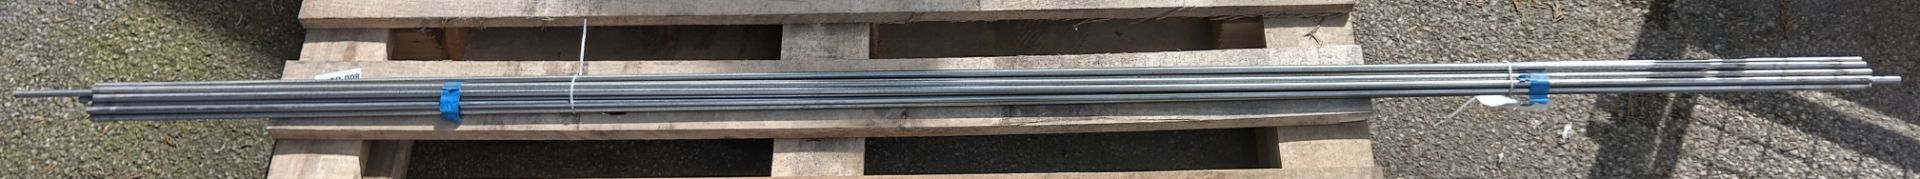 11x stainless steel bars - L 1920 x D 6mm